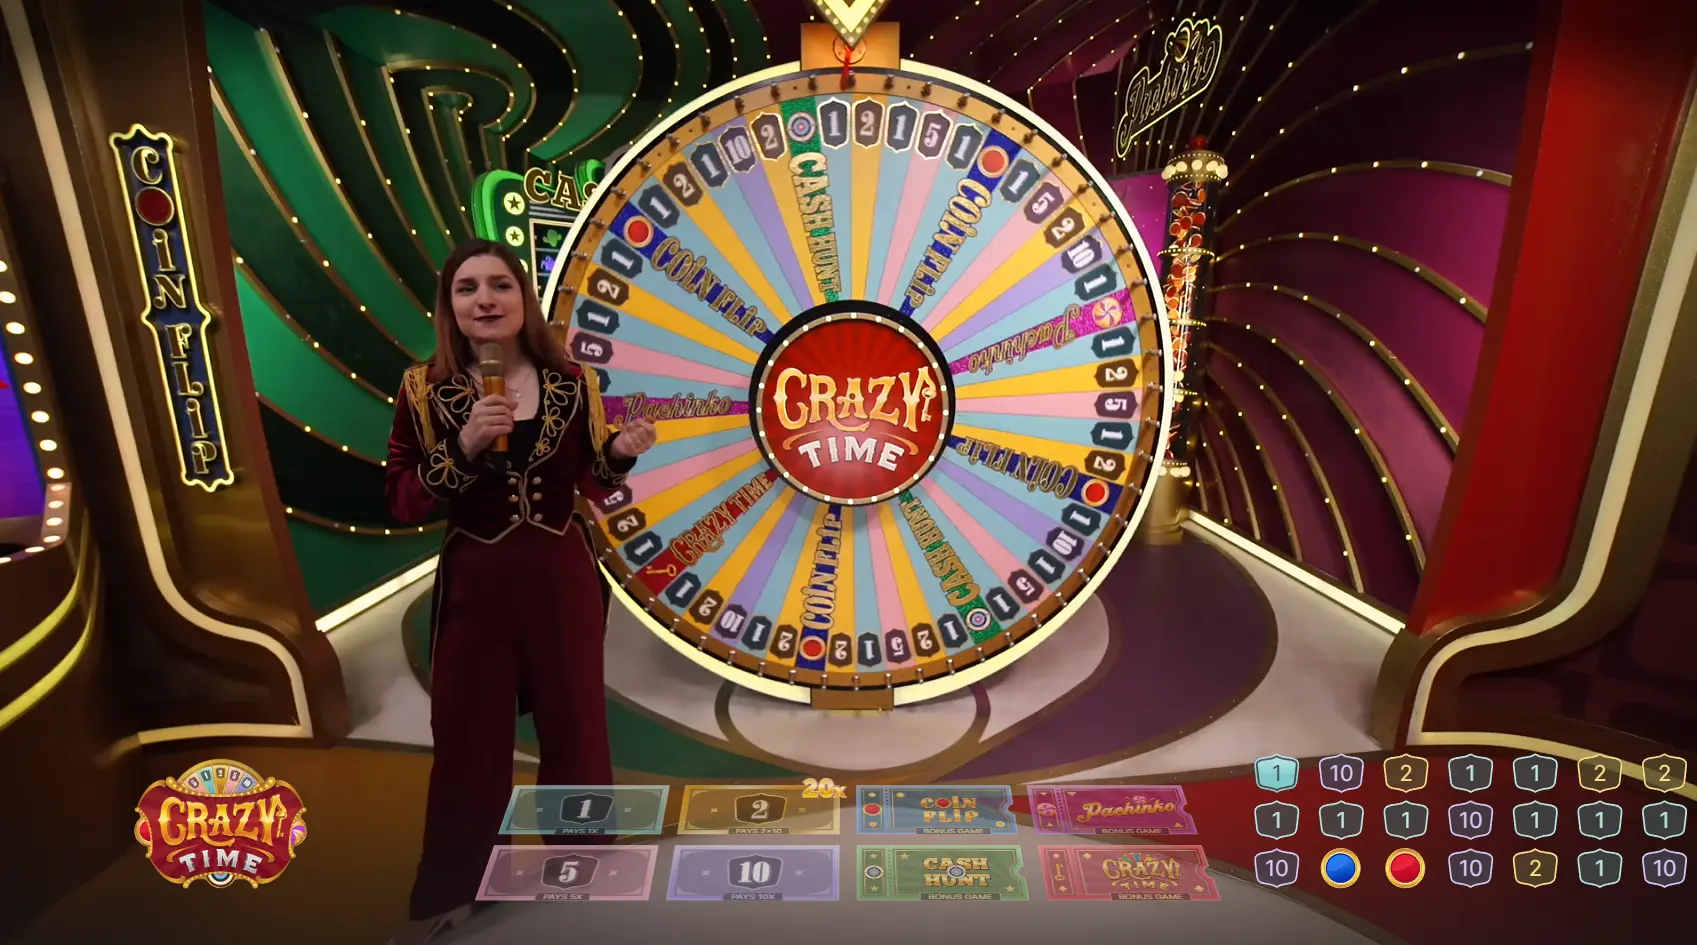 Crazy Time is a unique live casino game show featuring a carnival-style money wheel with 54 varied segments